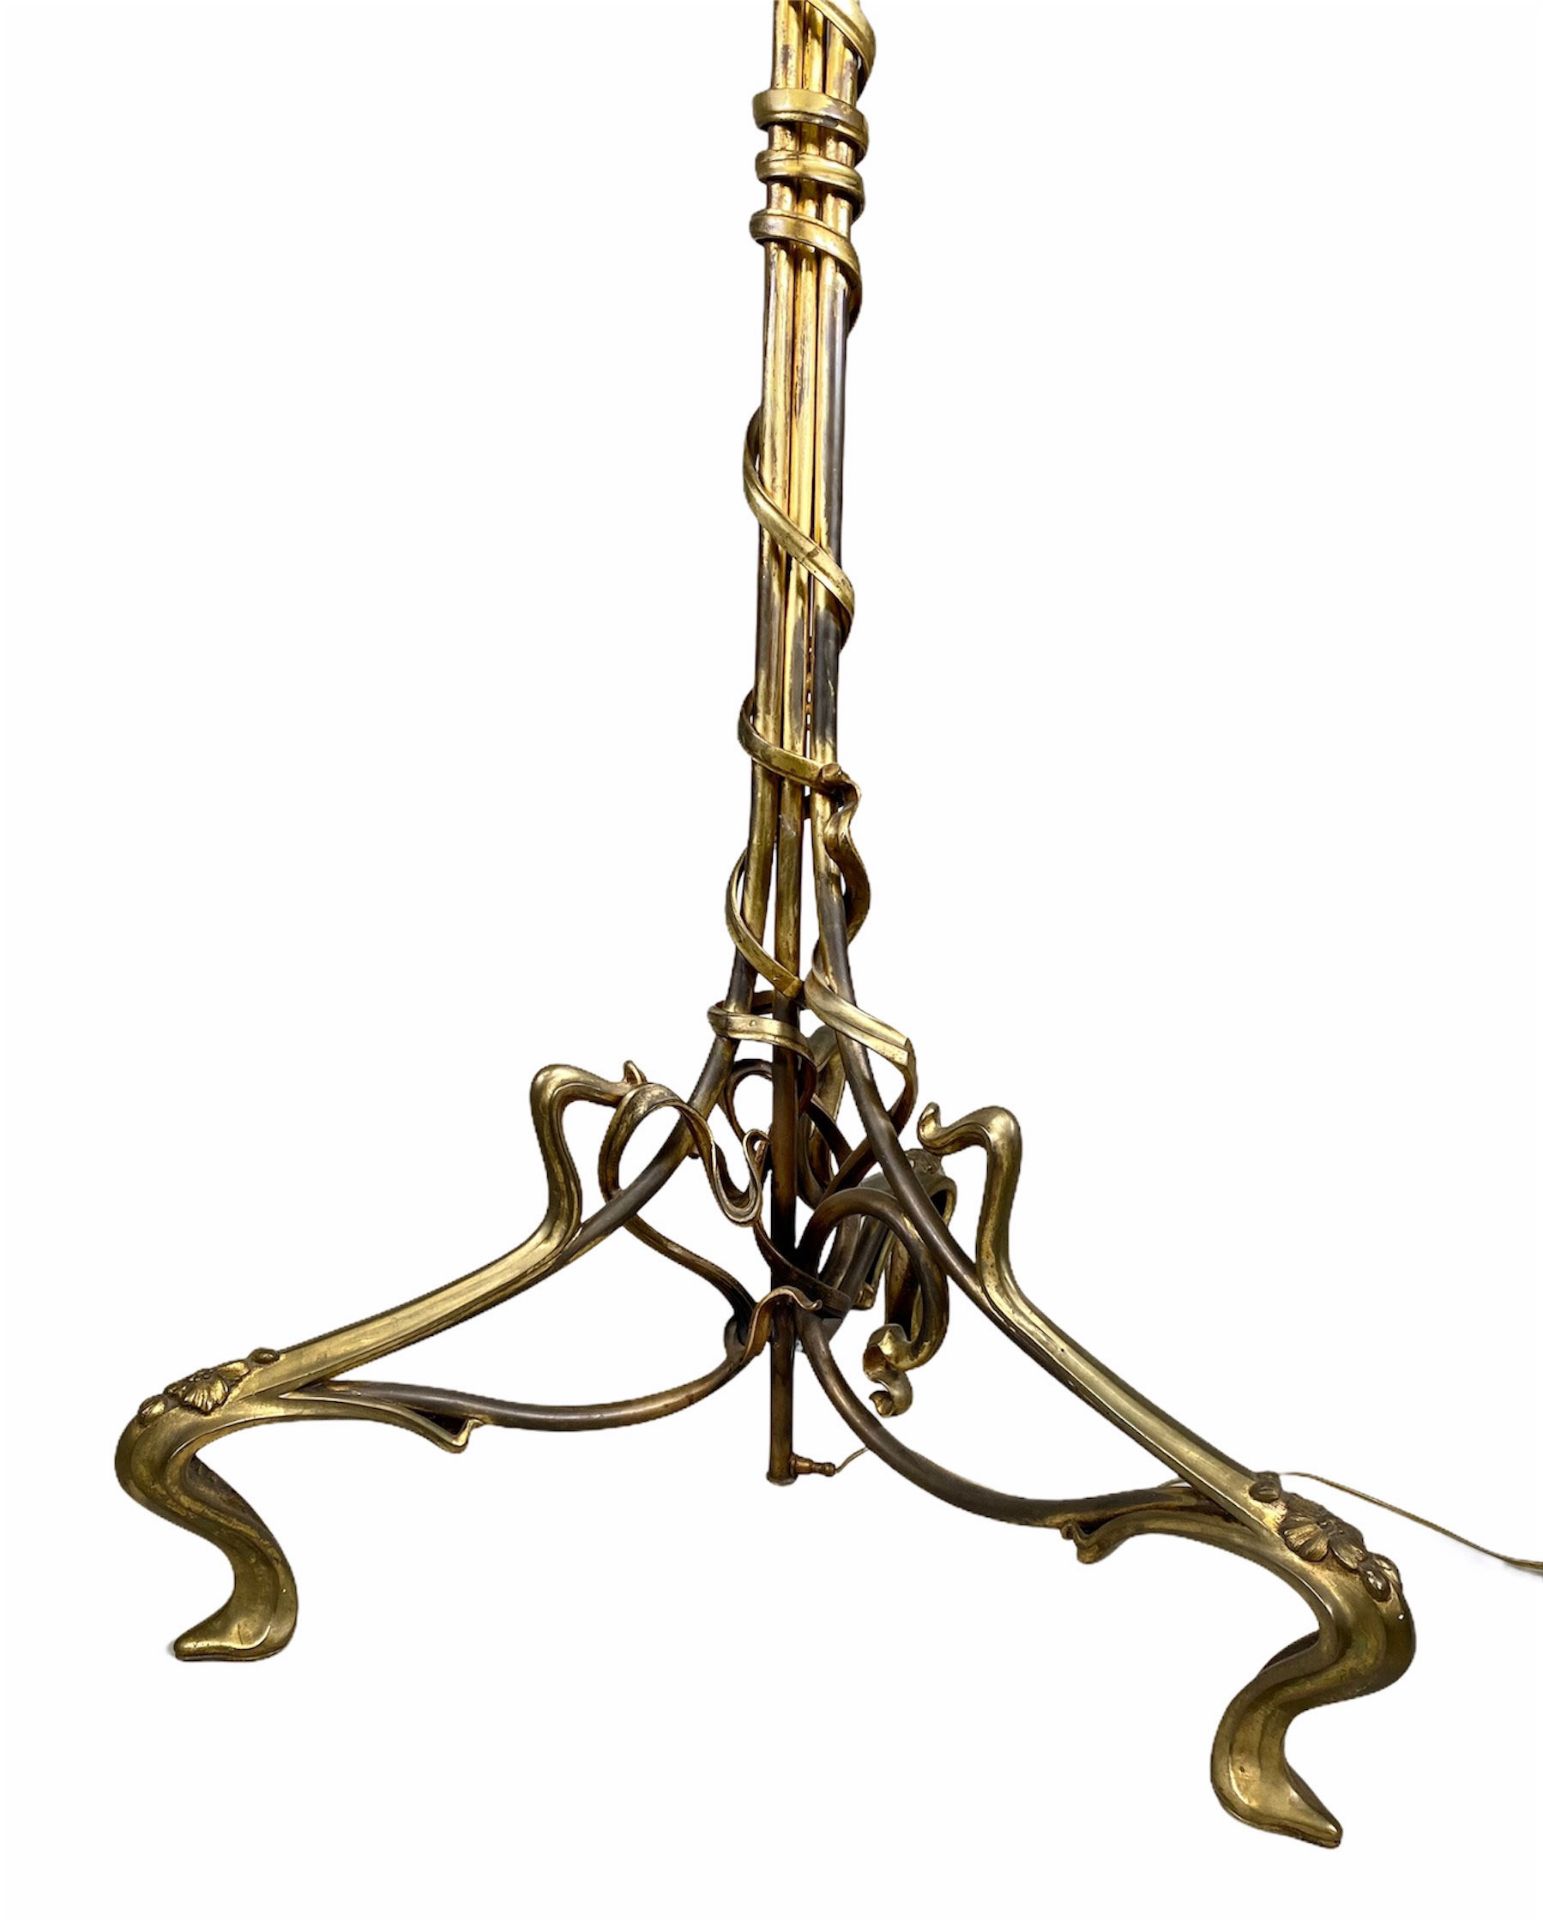 Victor Horta (attributed to) Imposing living room lamp with vegetable base in bronze. "added bobeche - Image 2 of 7